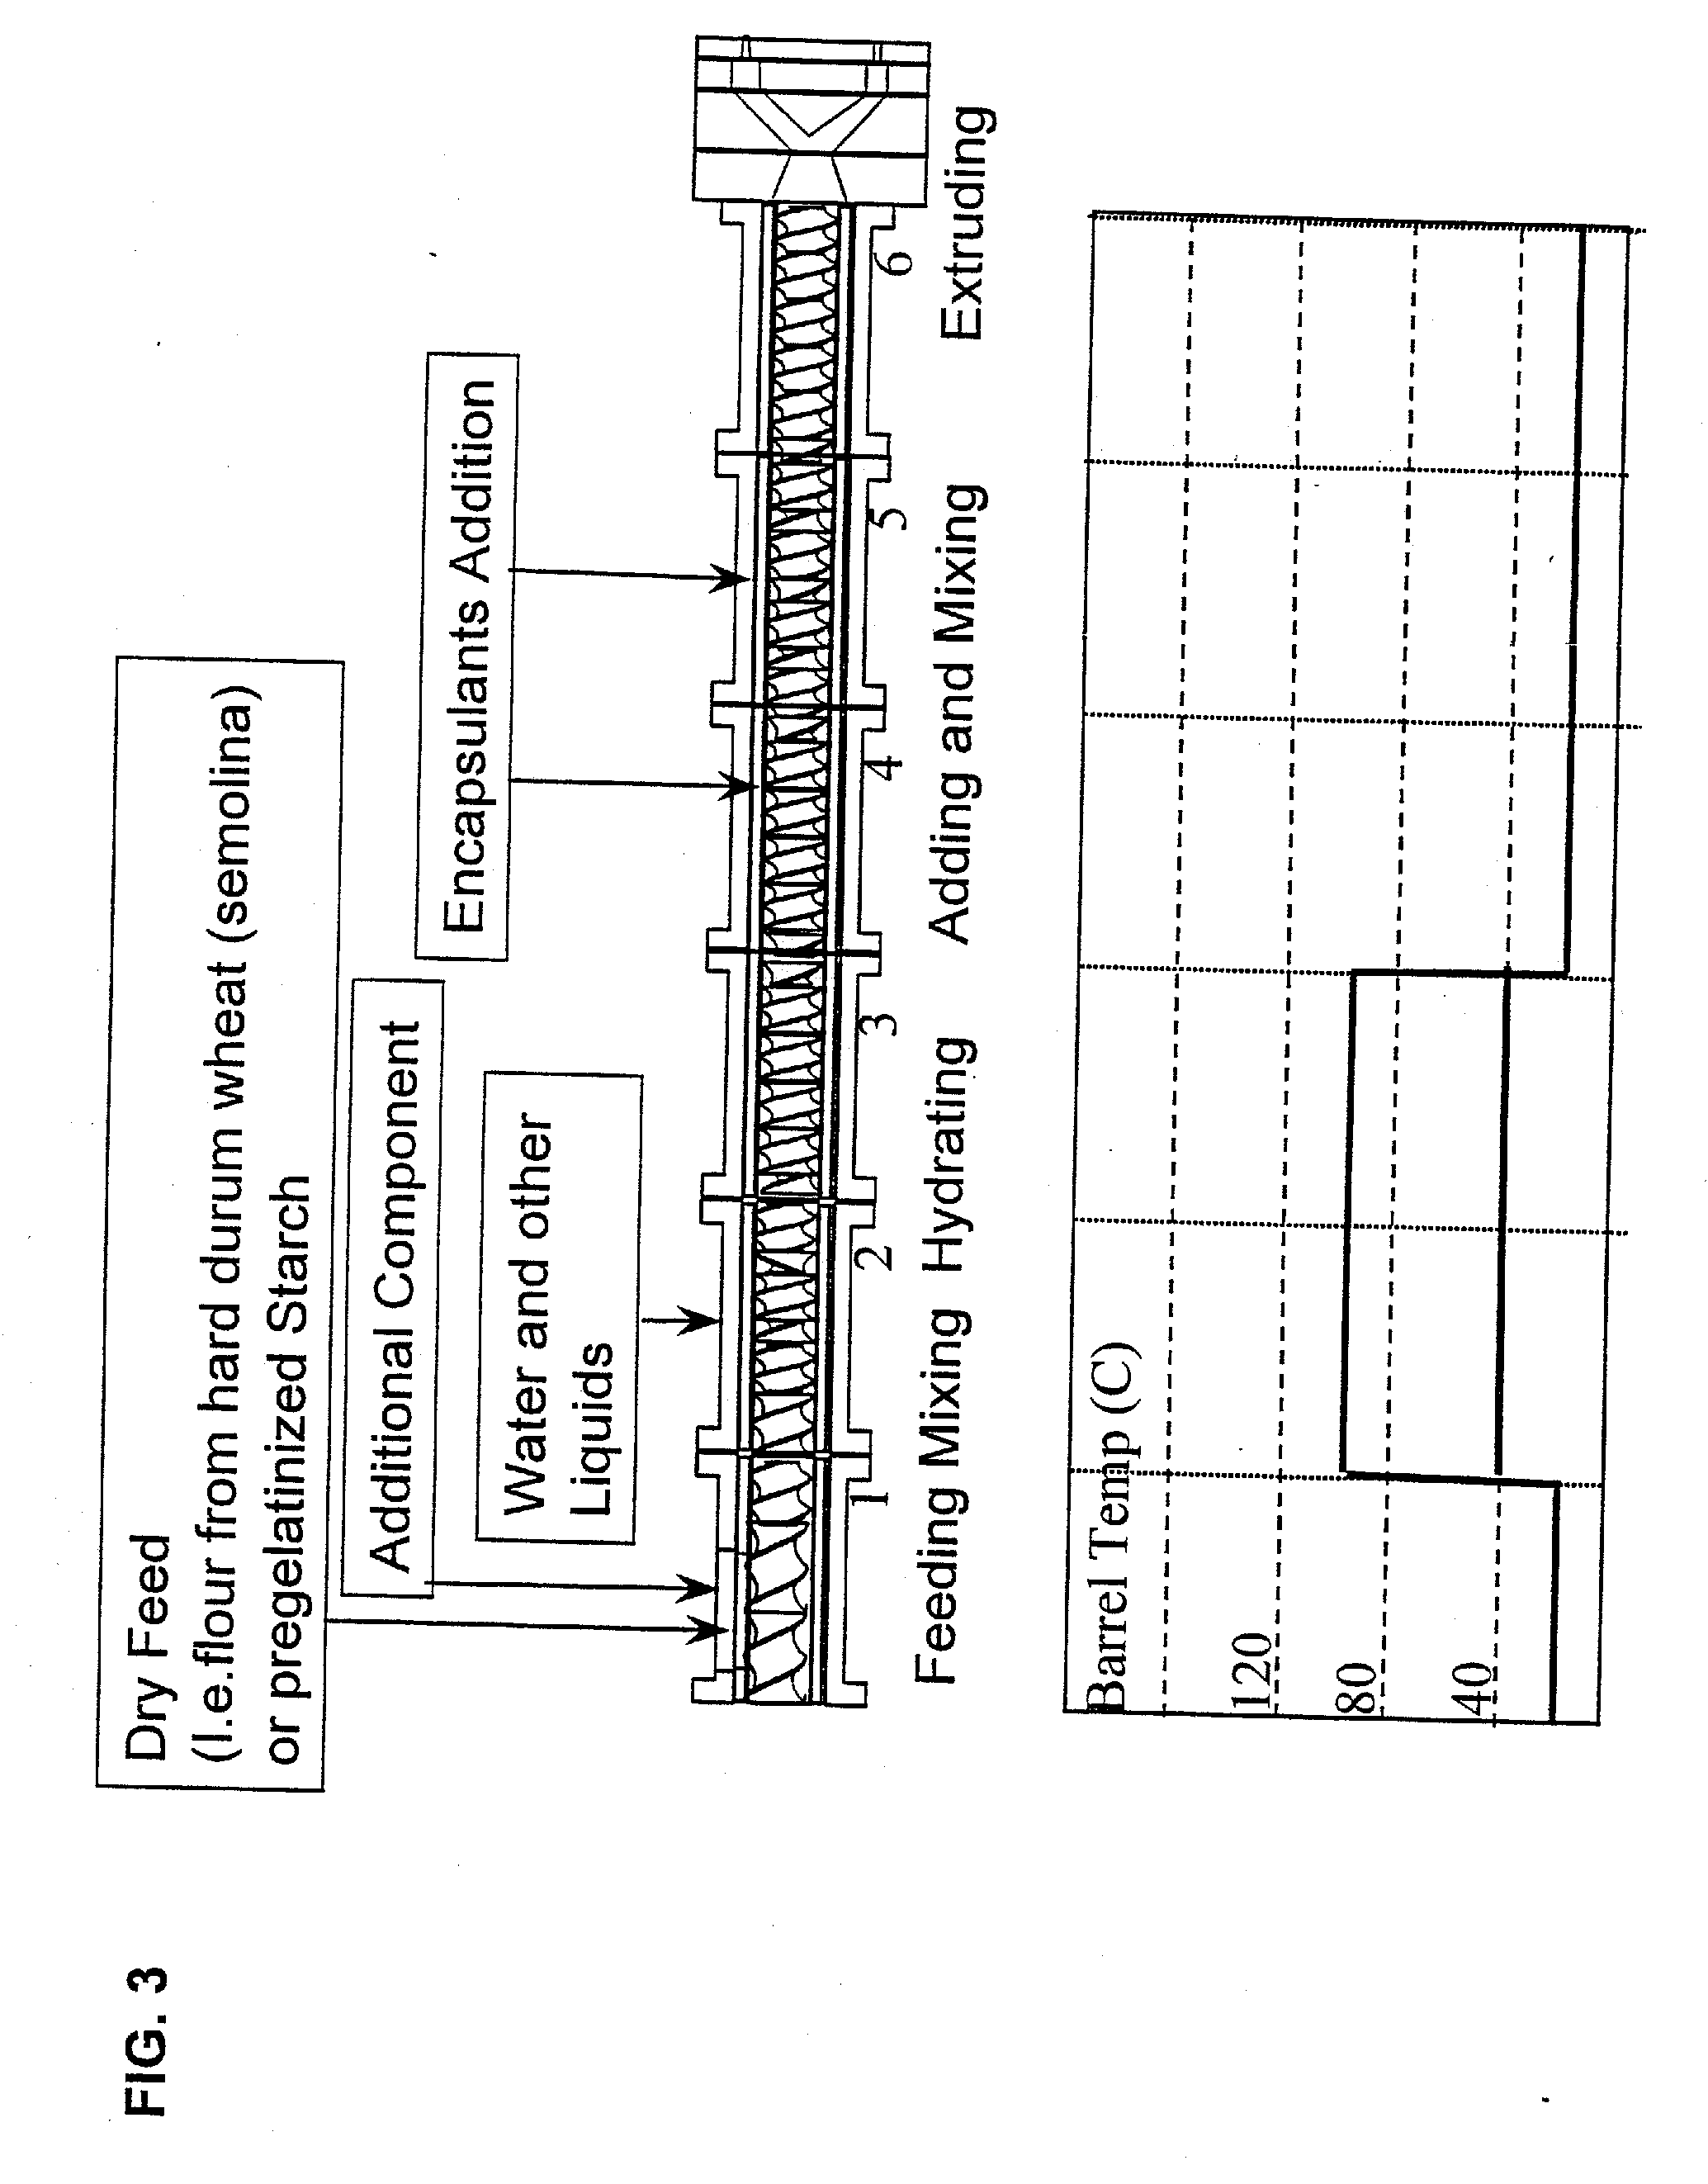 Method for the embedding and encapsulation of components